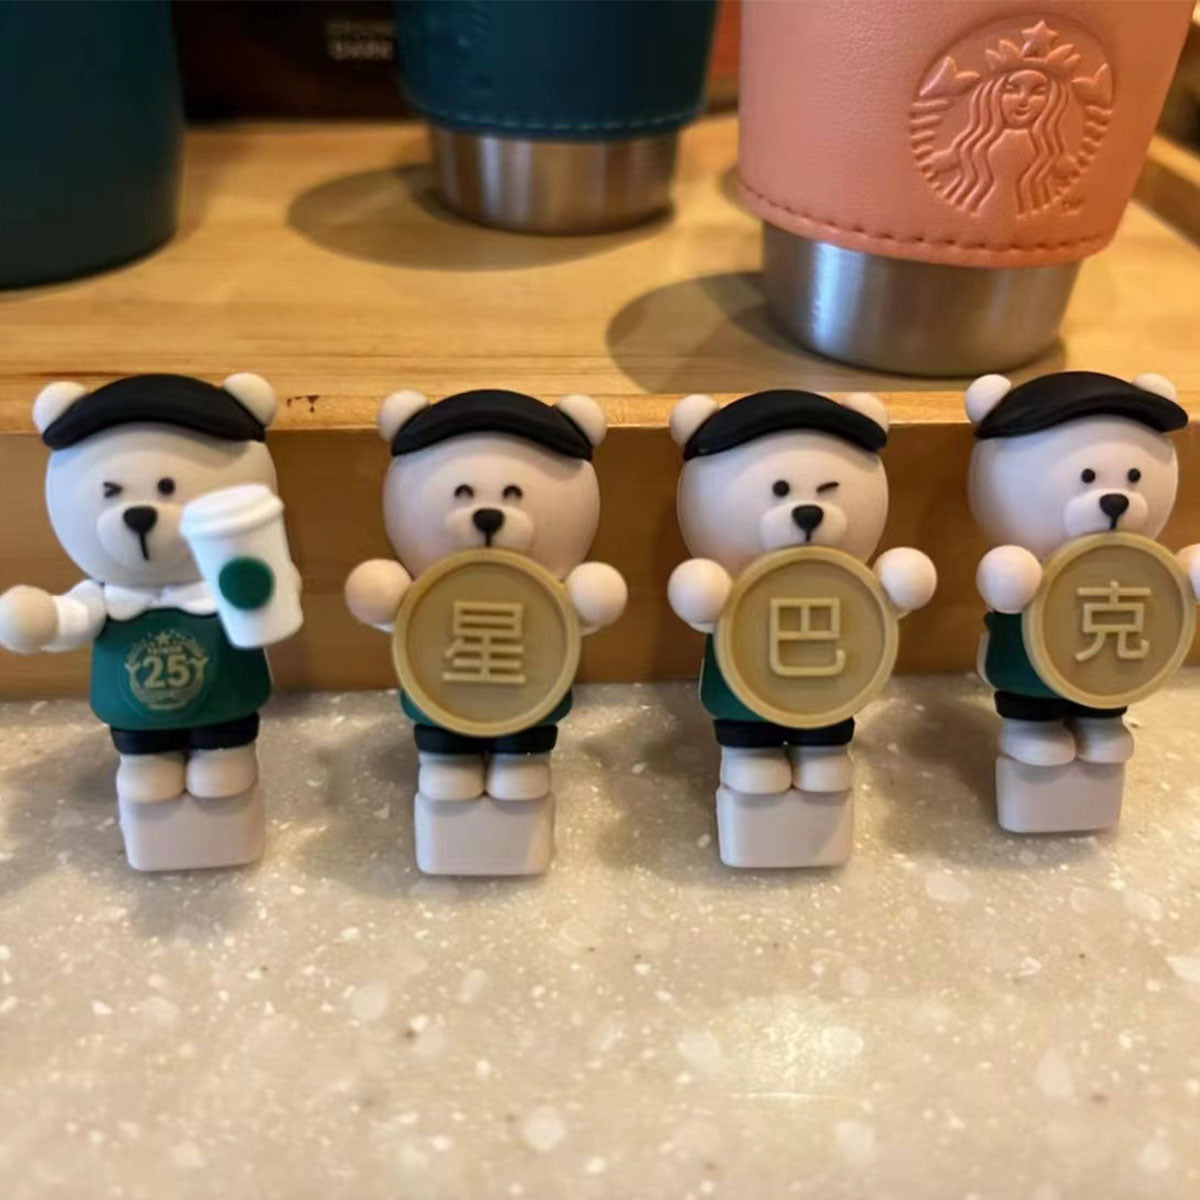 Starbucks Taiwan 2023 blind box lid plug stopper one box only contains